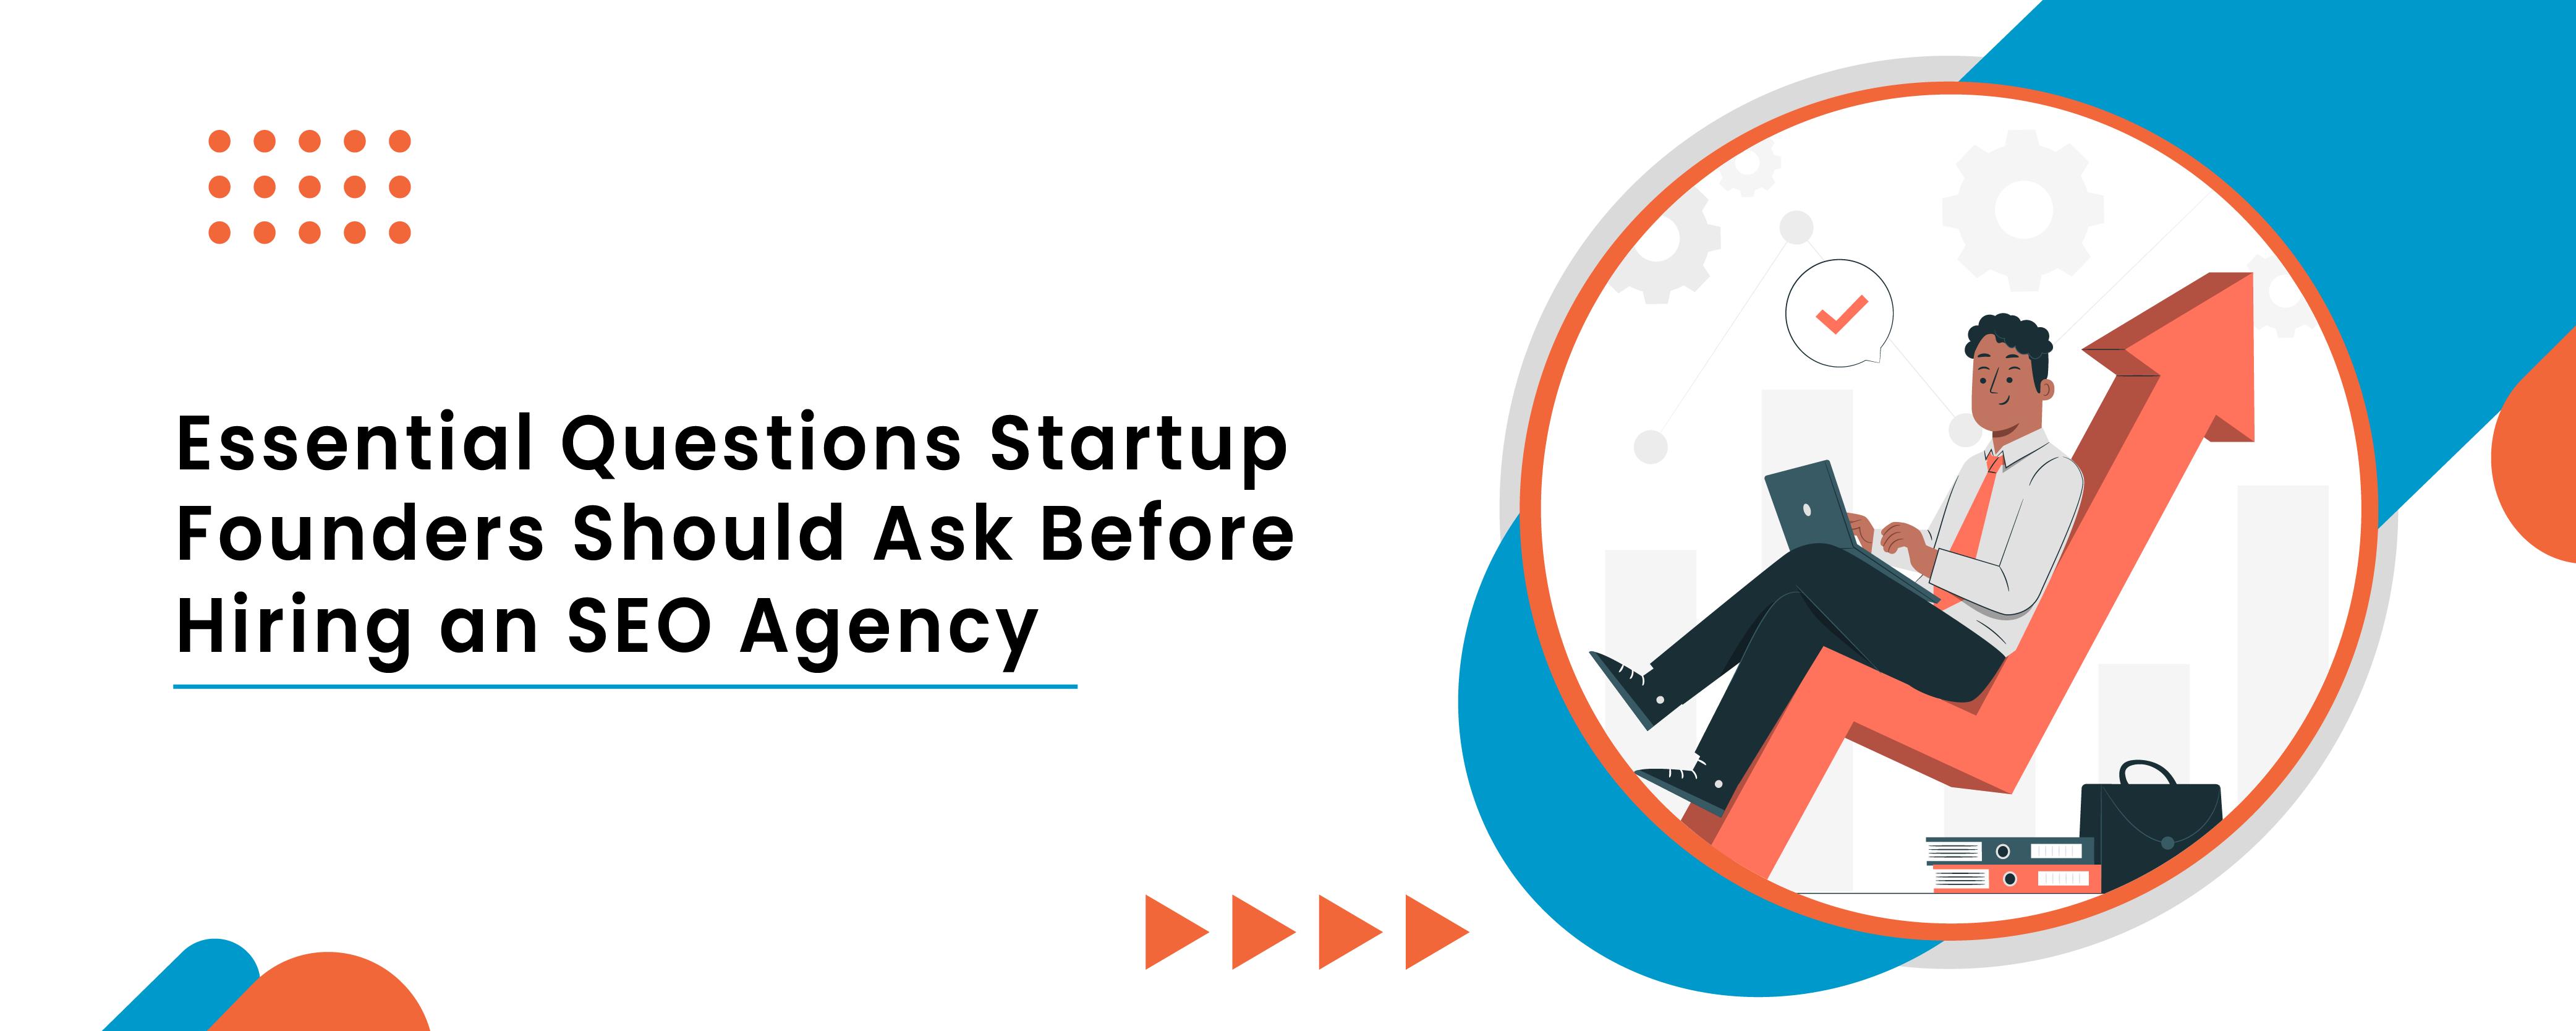 Essential Questions Startup Founders